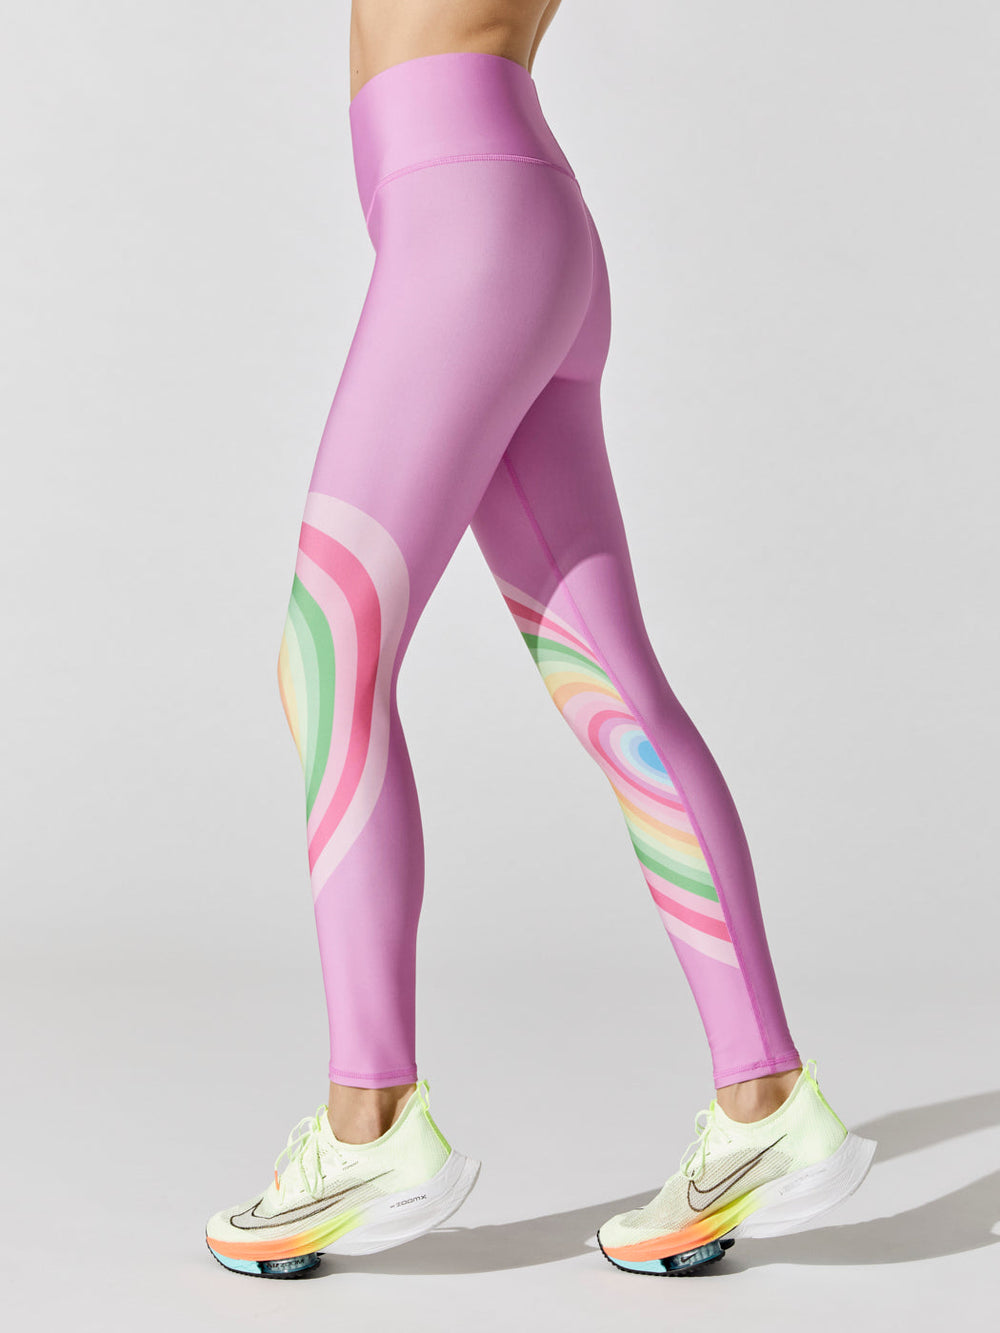 Pastel Psychedelic Heart Duo Knit Legging - Pastel Psychedelic Heart